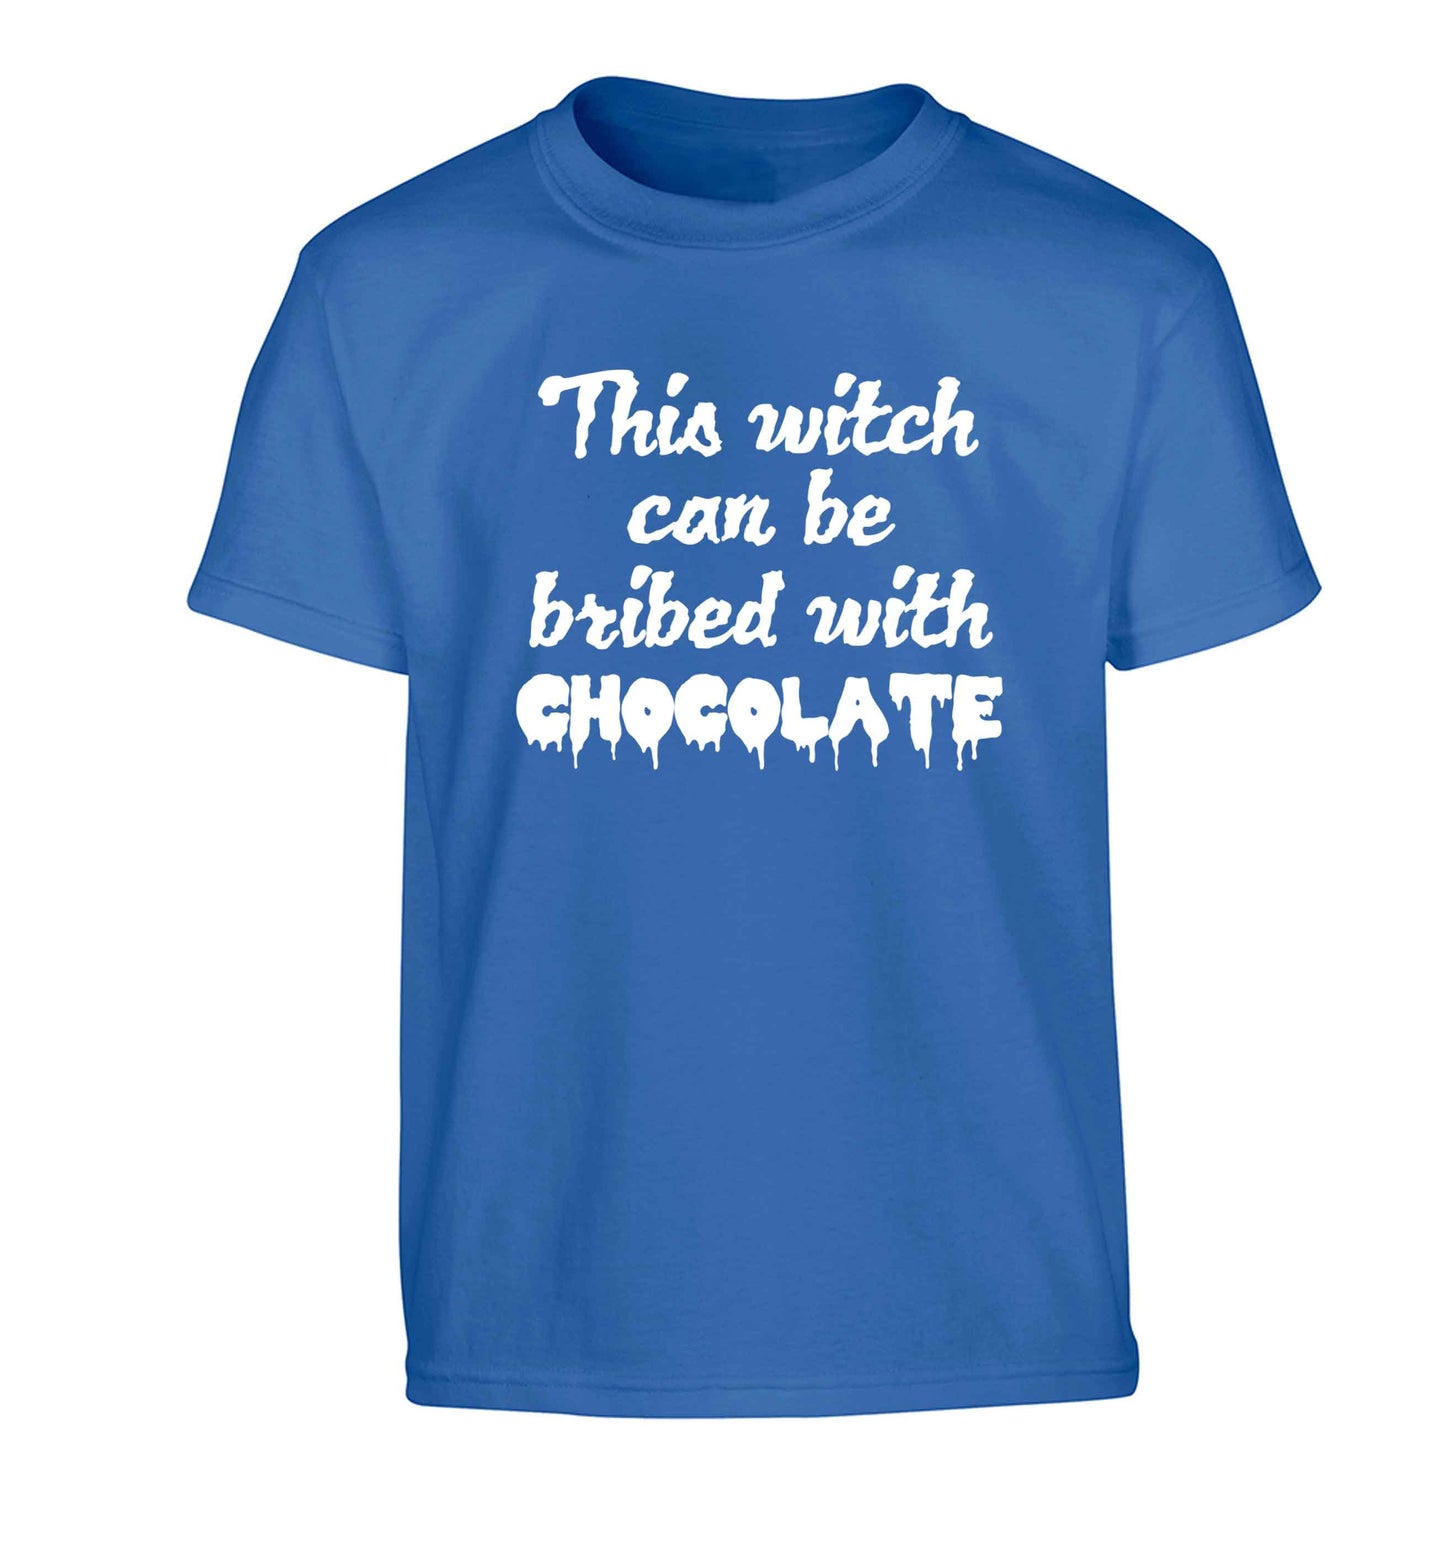 This witch can be bribed with chocolate Children's blue Tshirt 12-13 Years